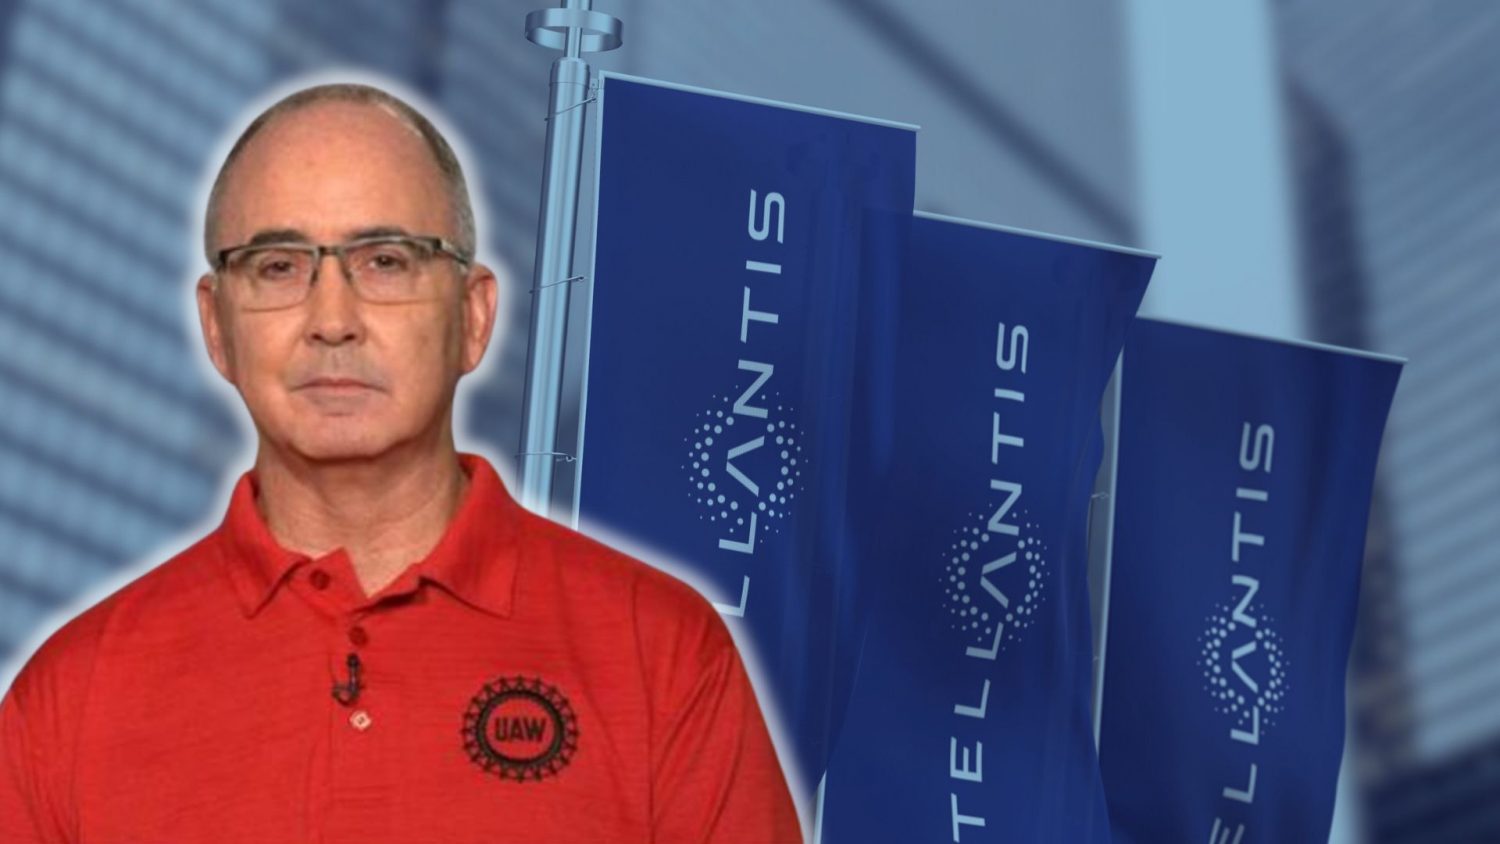 UAW President Shawn Fain condemned Stellantis for terminating 539 temporary workers, calling it "heinous" and "shameful."